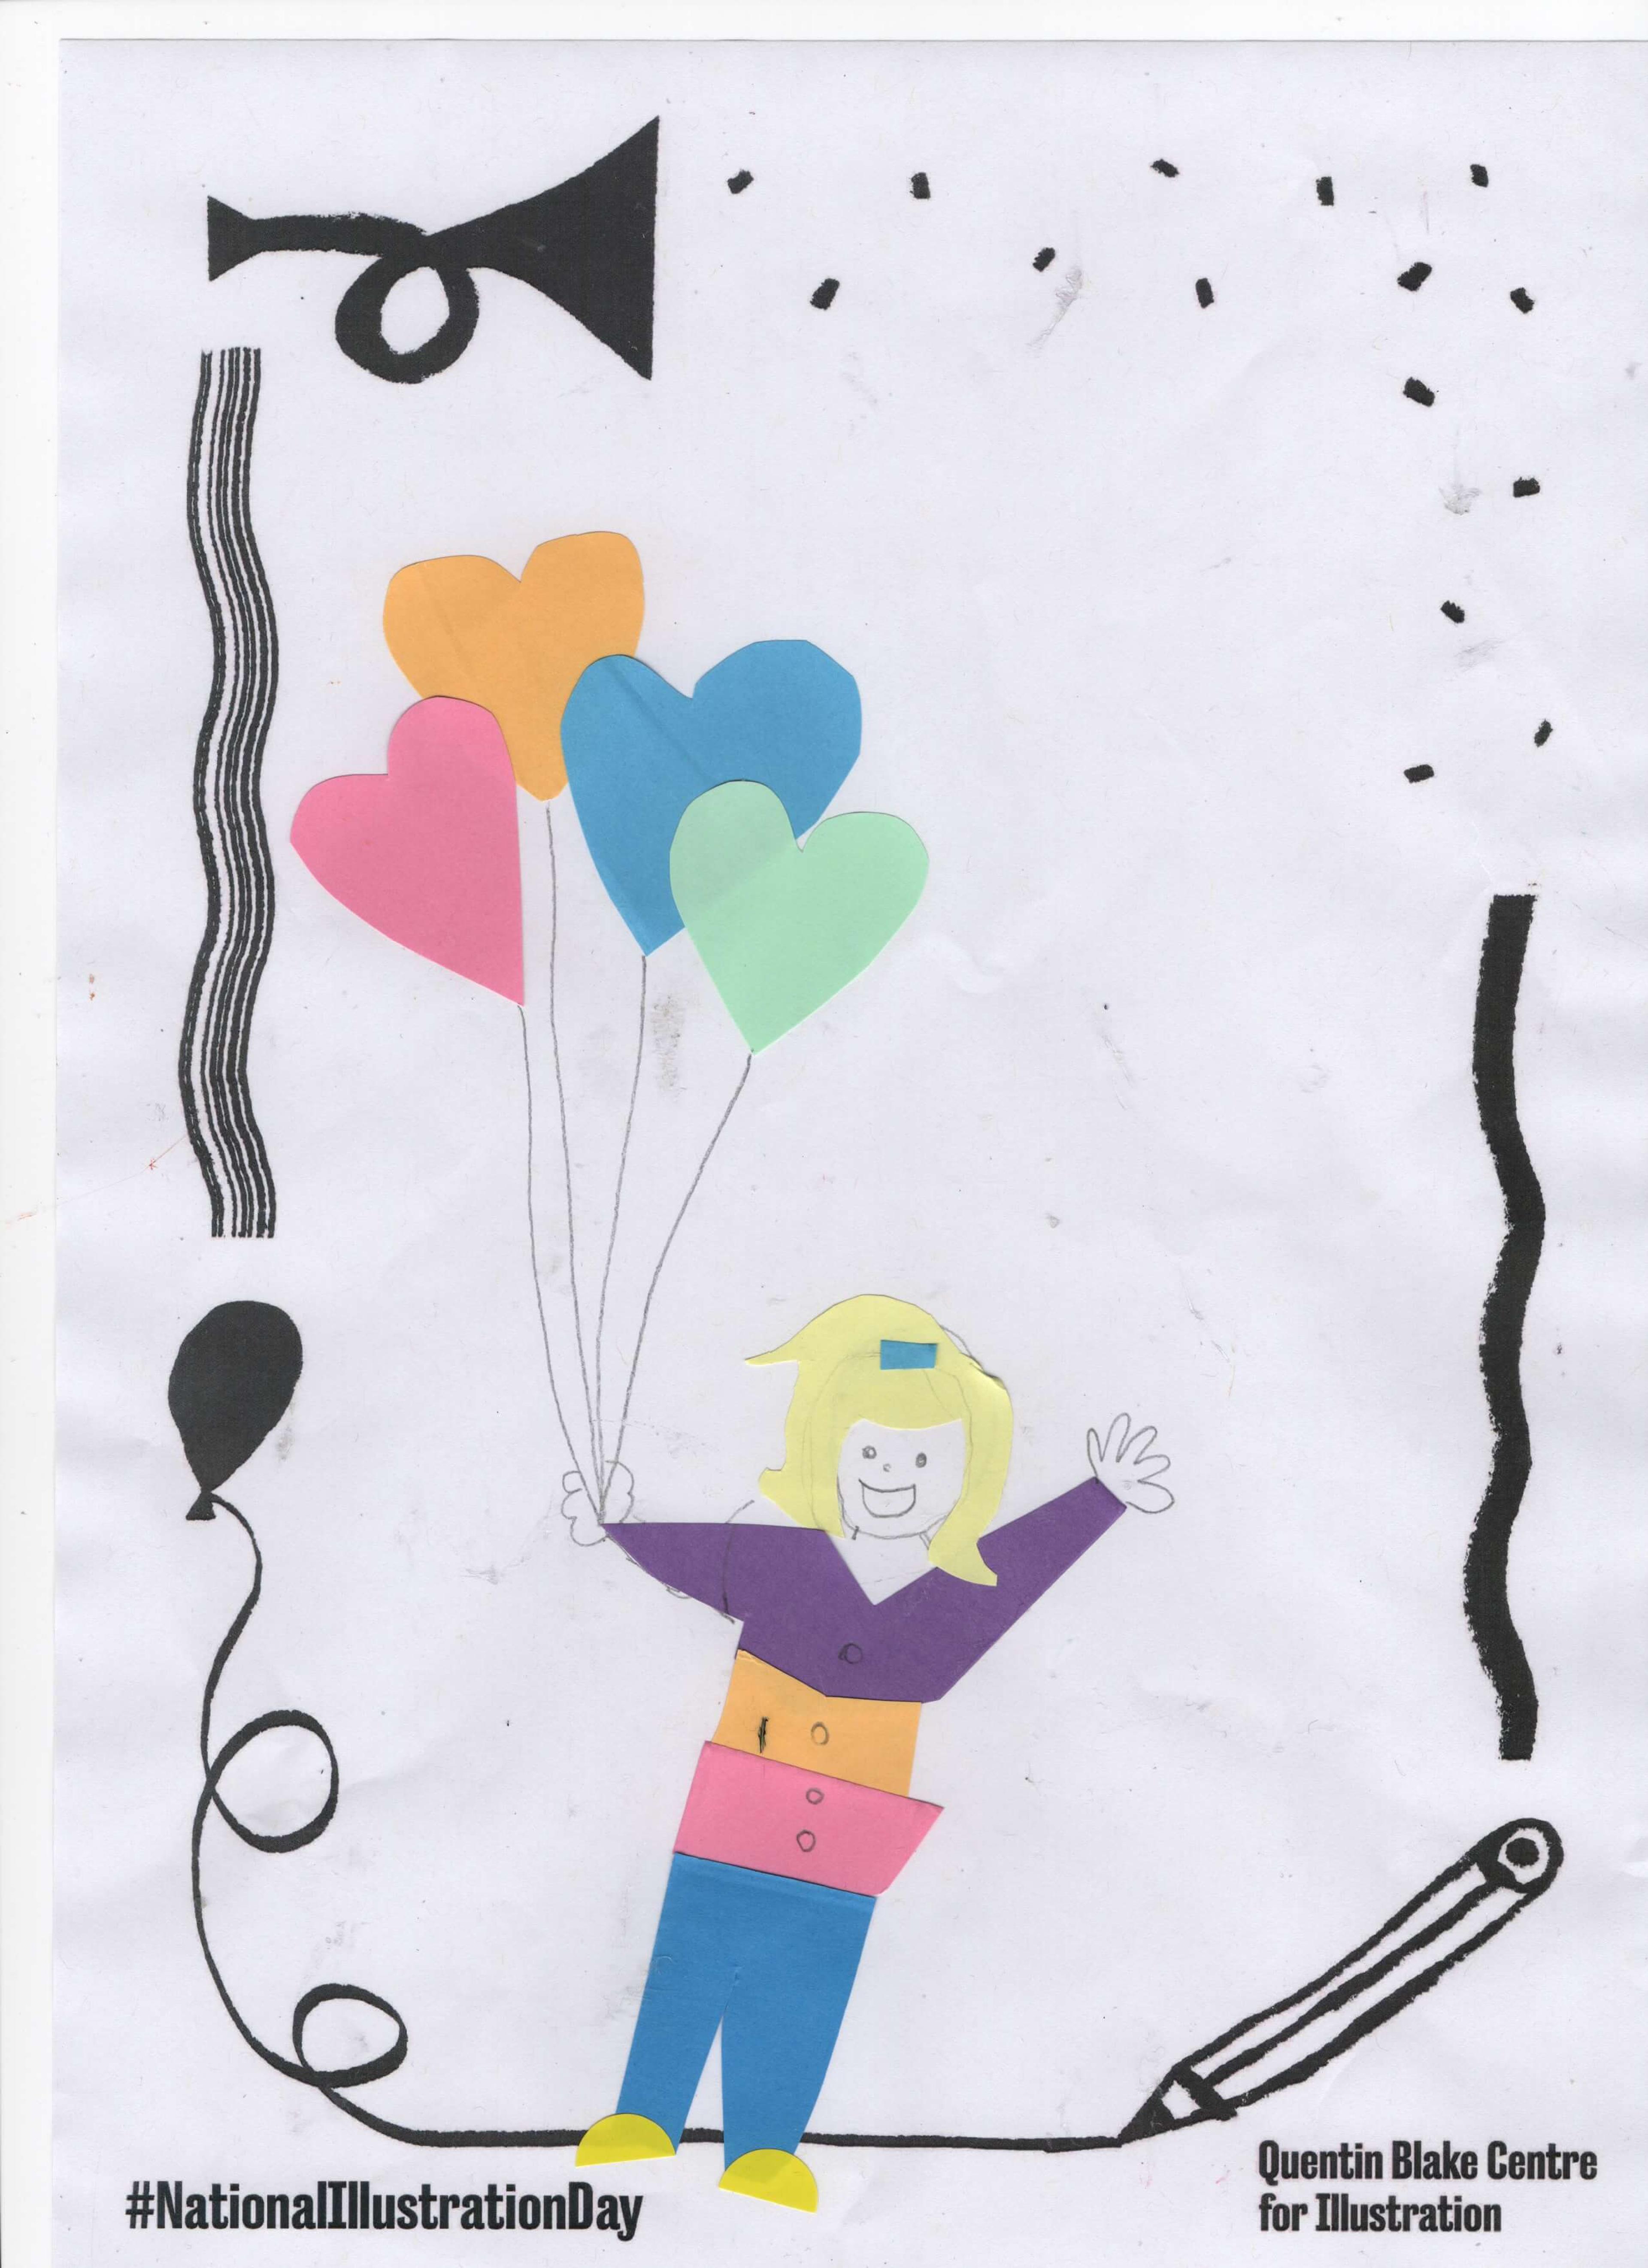 A happy collage of a child holding colourful heart-shaped balloons